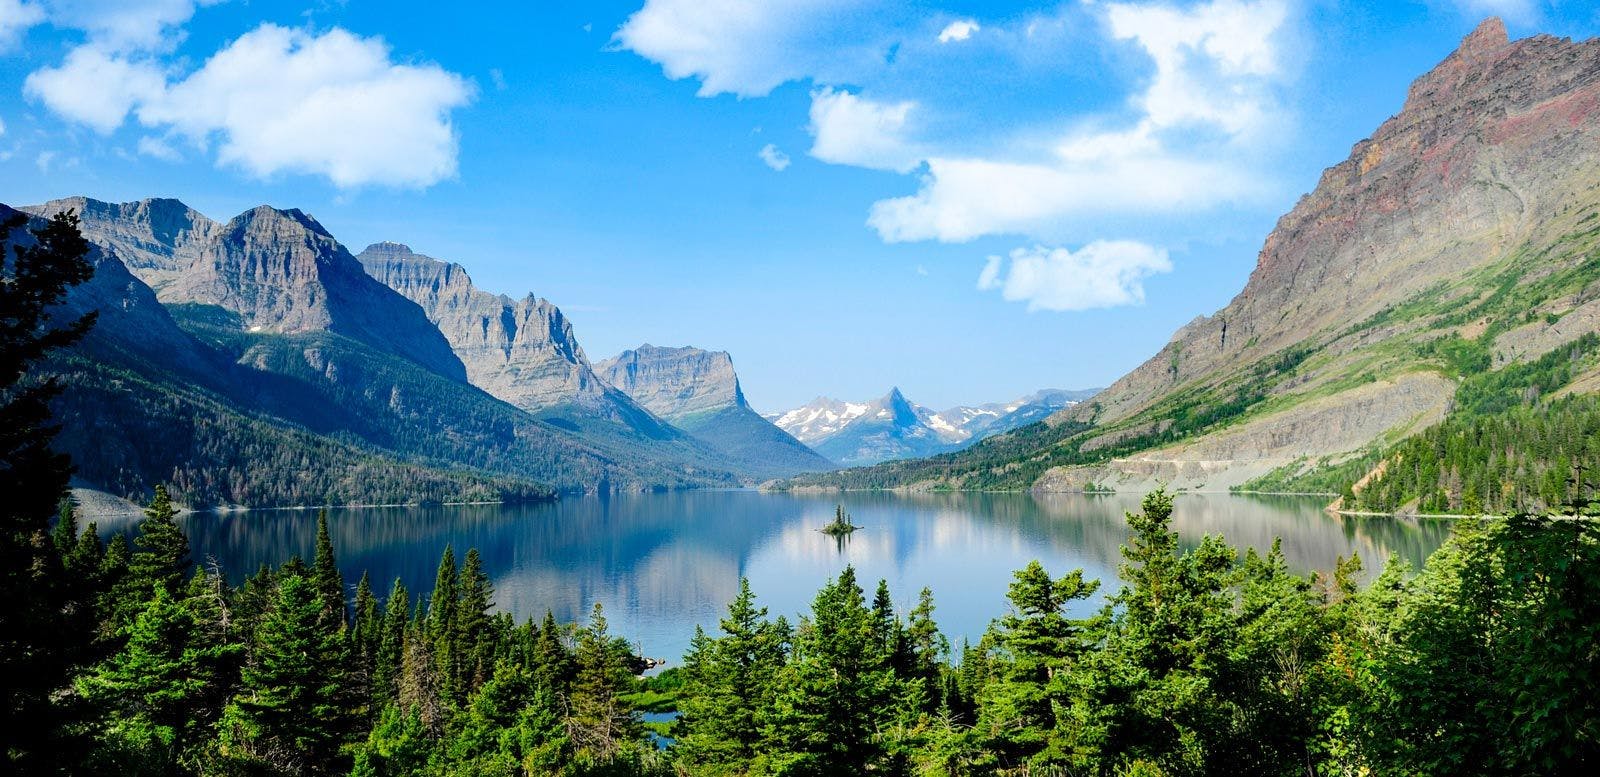 View of Glacier National Park with steep mountains, green forests and a still lake